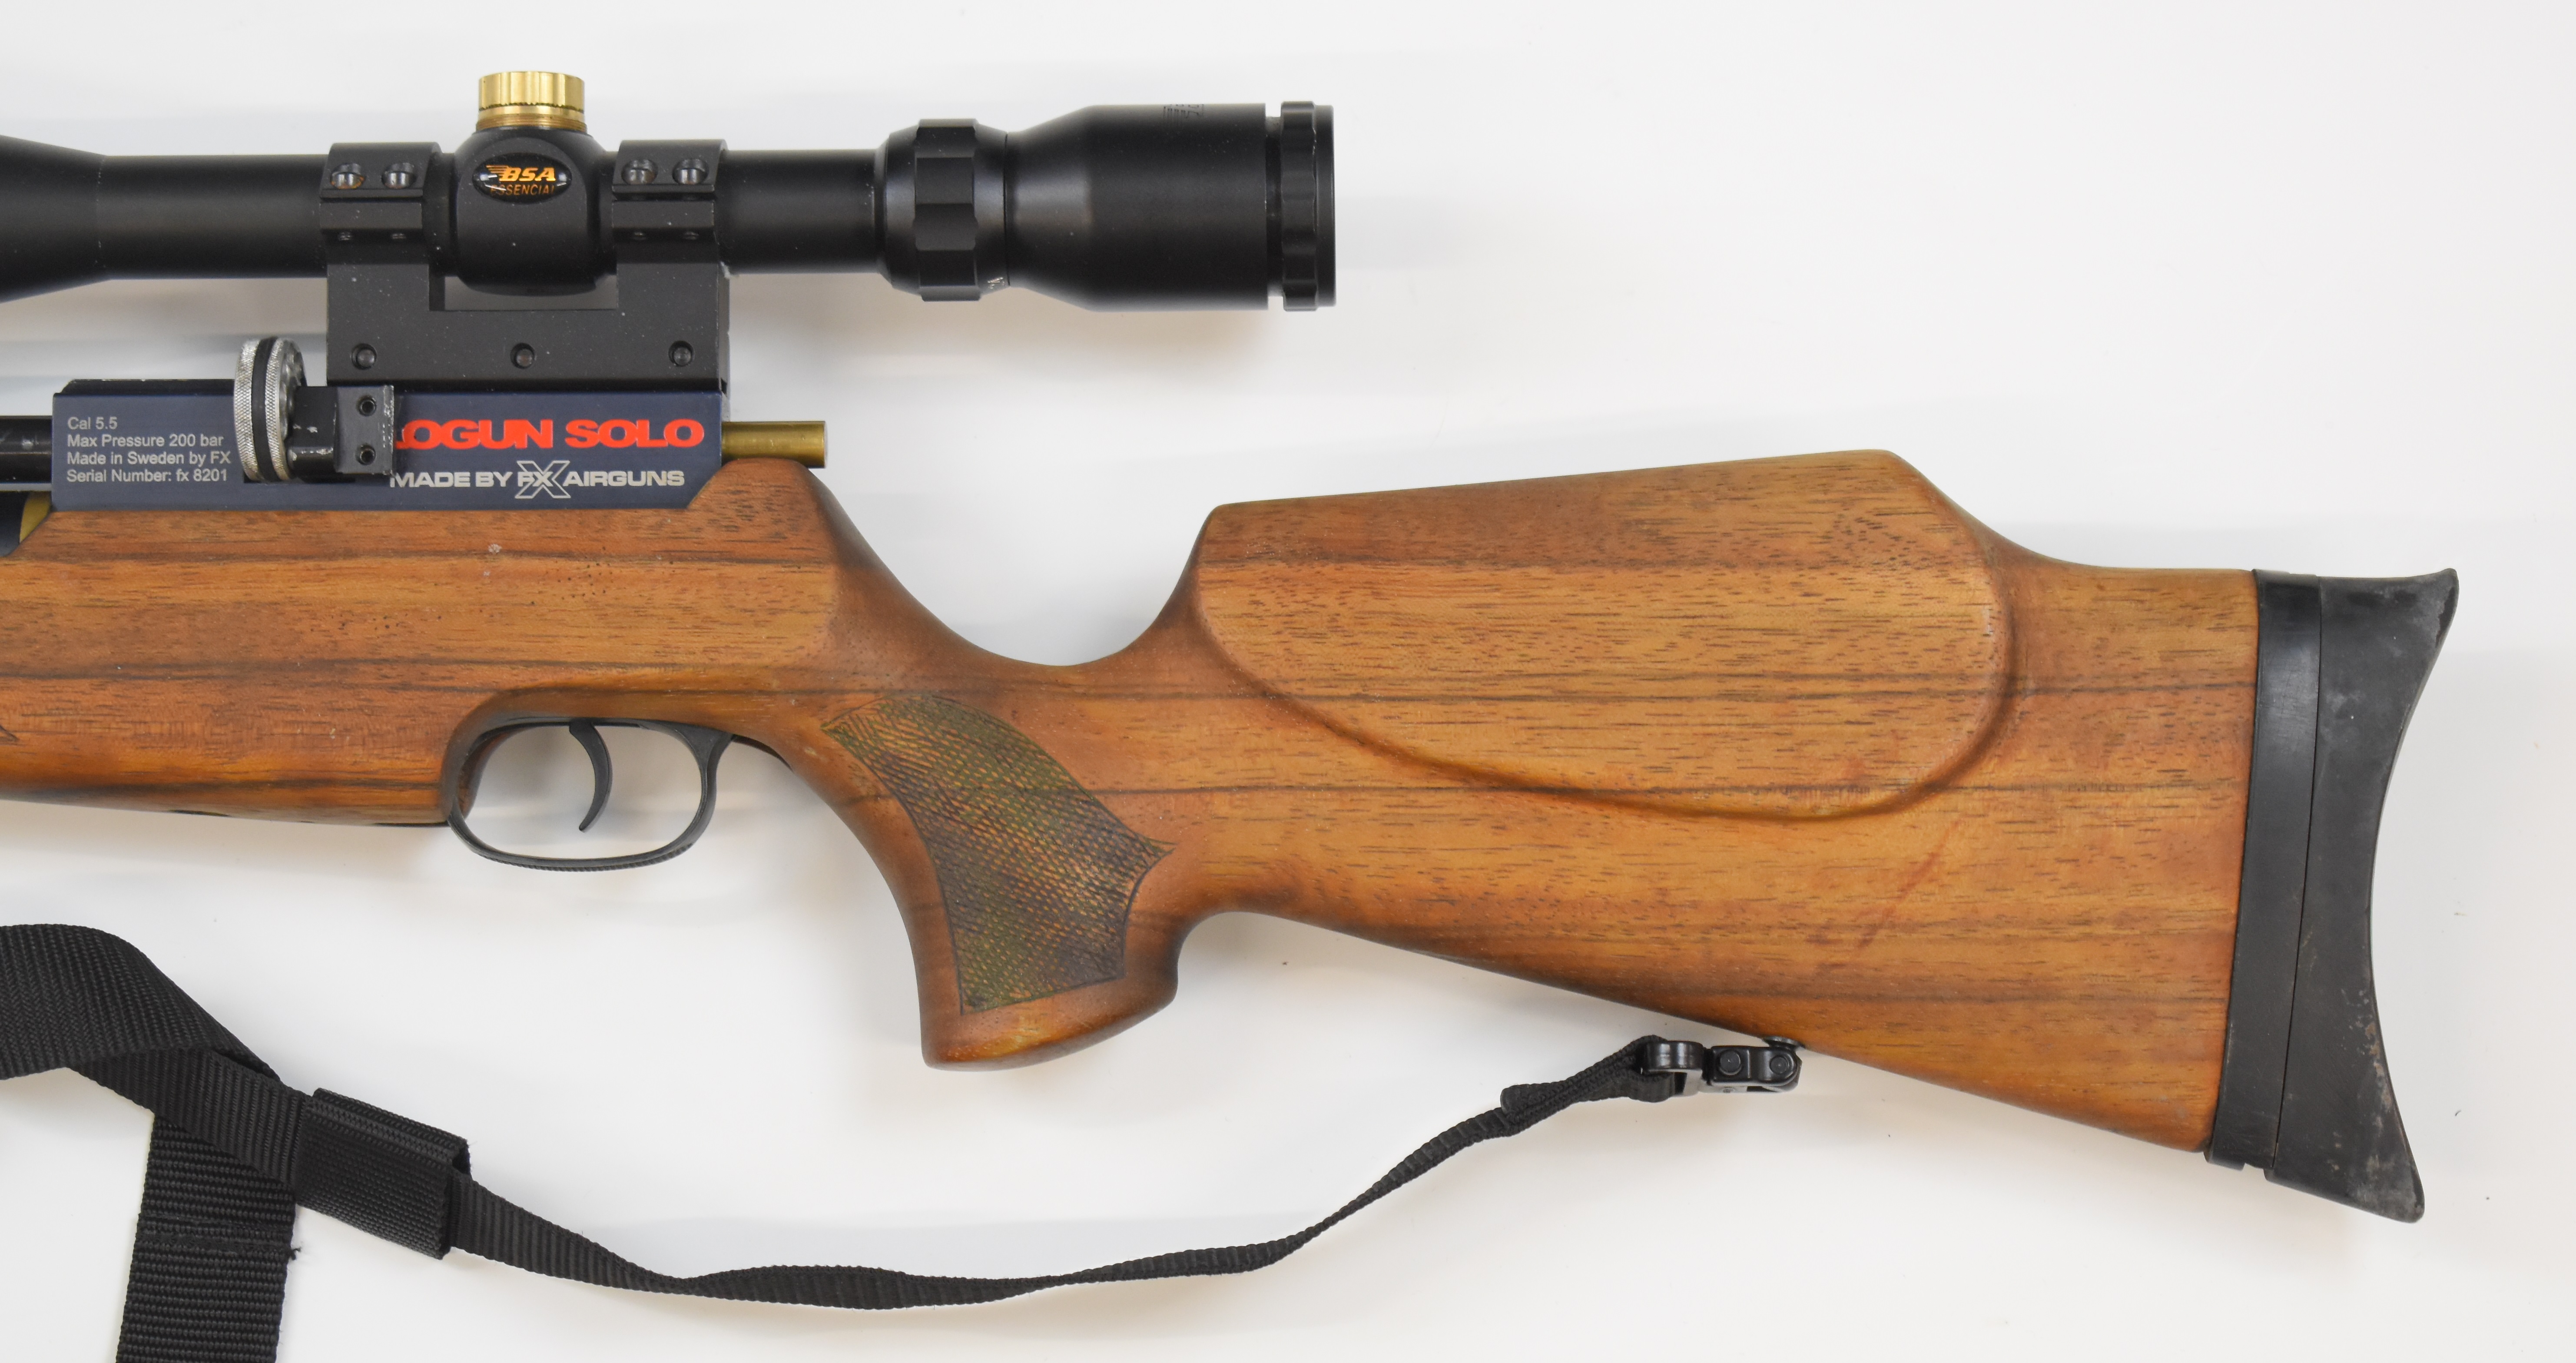 FX Logun Solo .22 PCP air rifle with chequered semi-pistol grip and forend, raised cheek piece, - Image 7 of 10